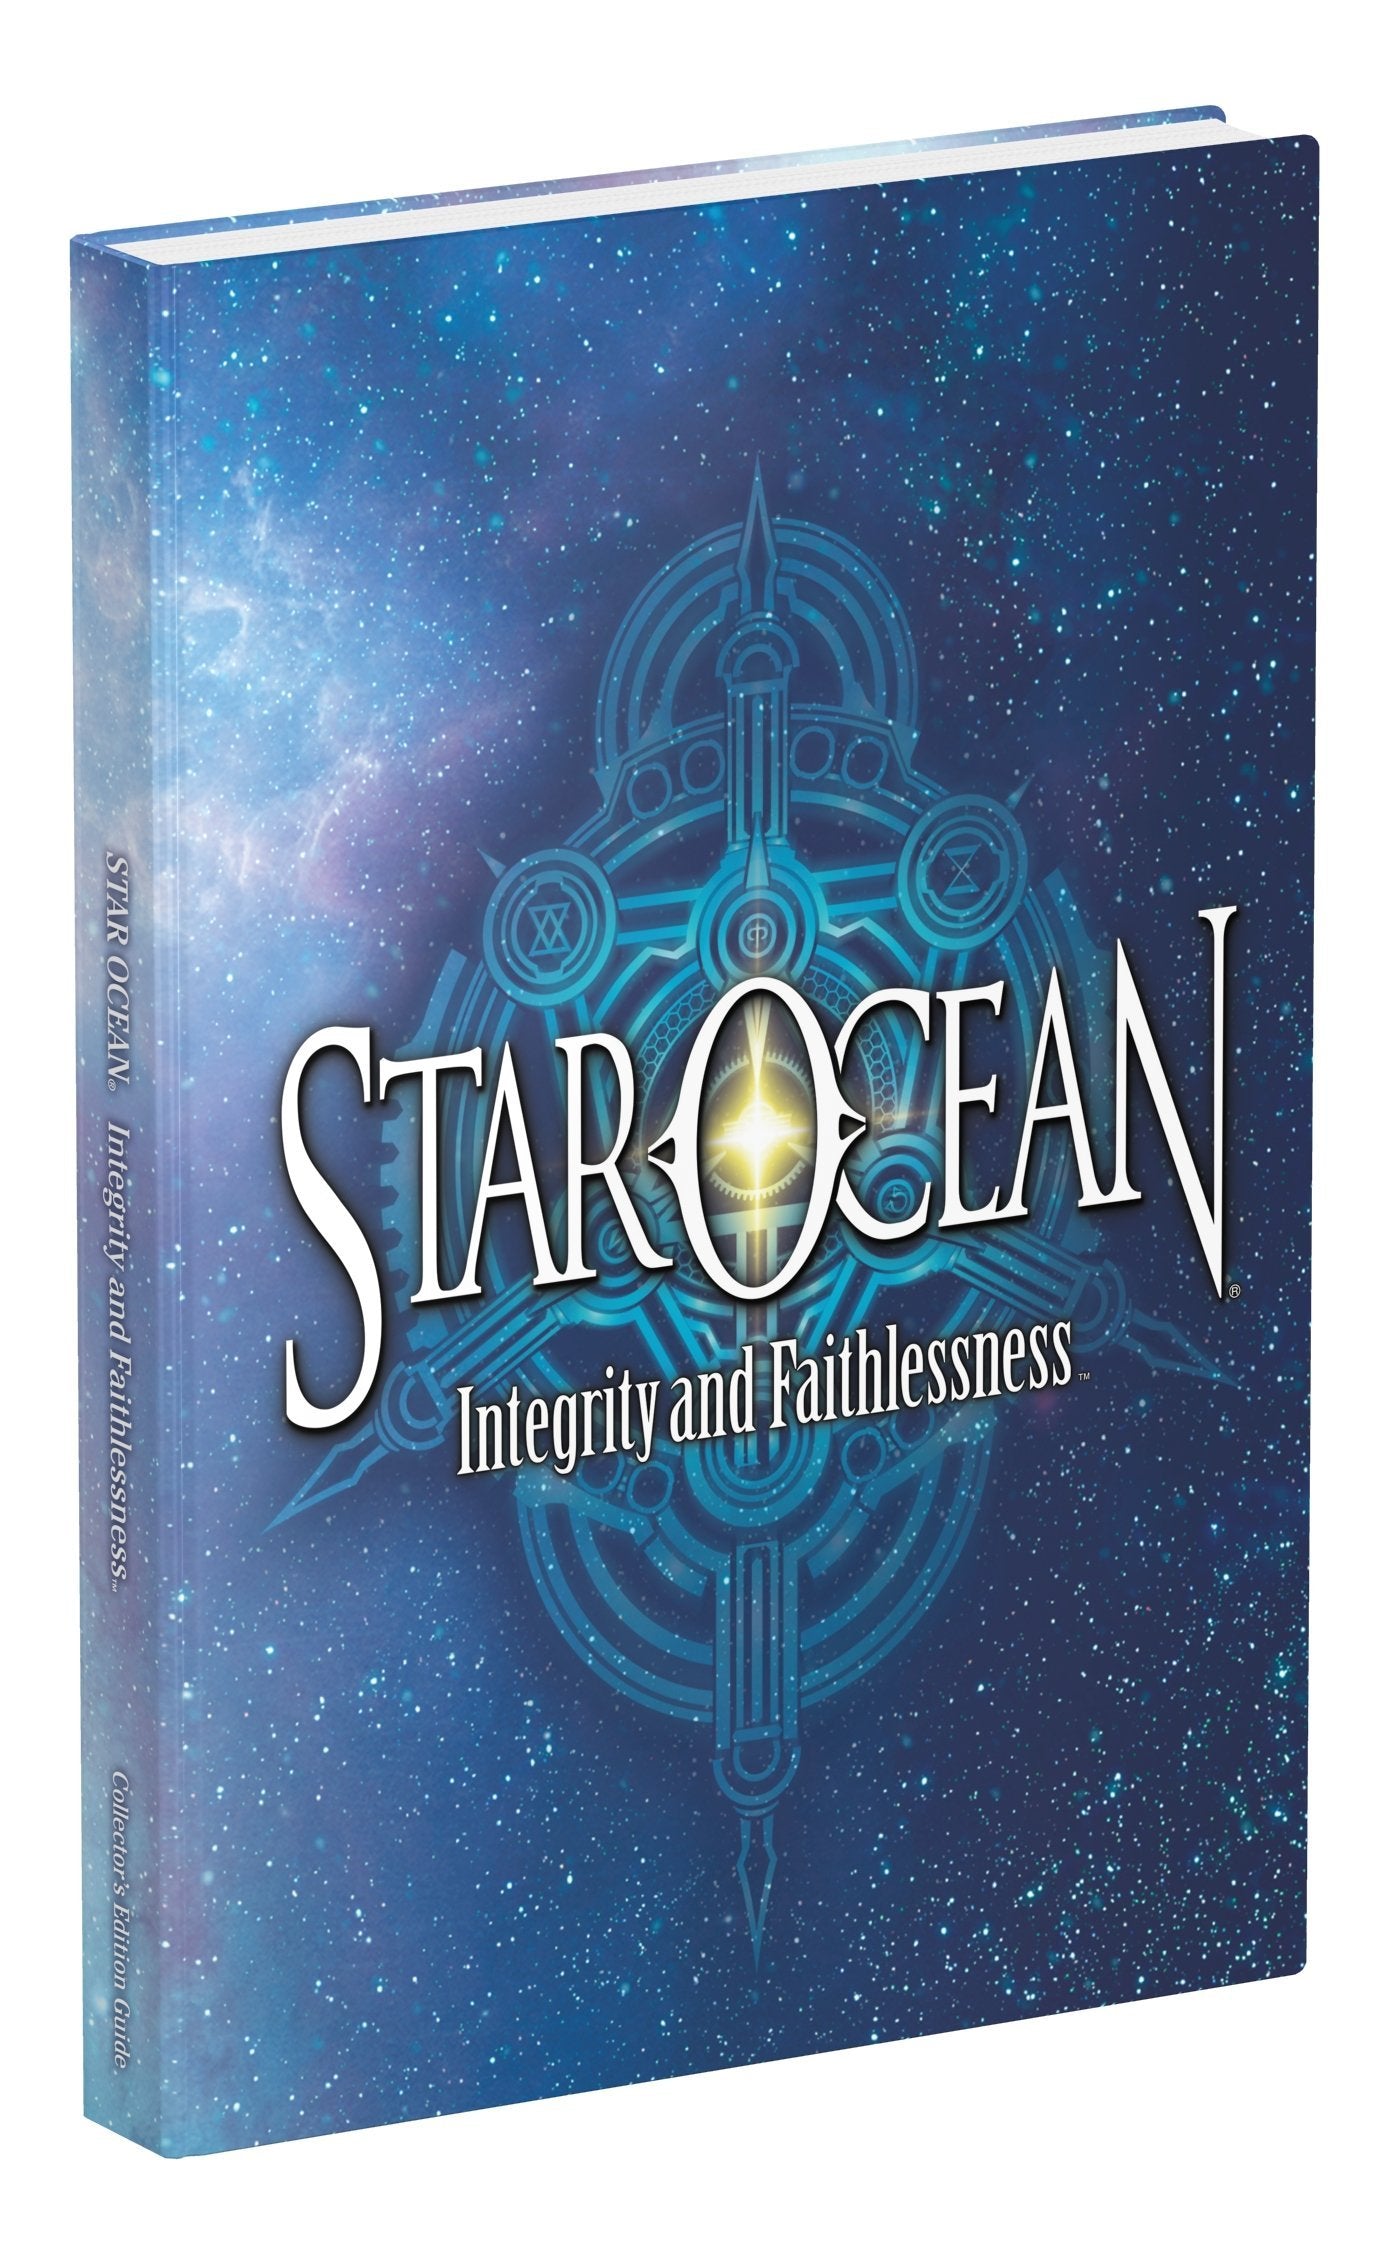 Star Ocean: Integrity and Faithlessness: Prima Collector's Edition Guide (Hardcover)